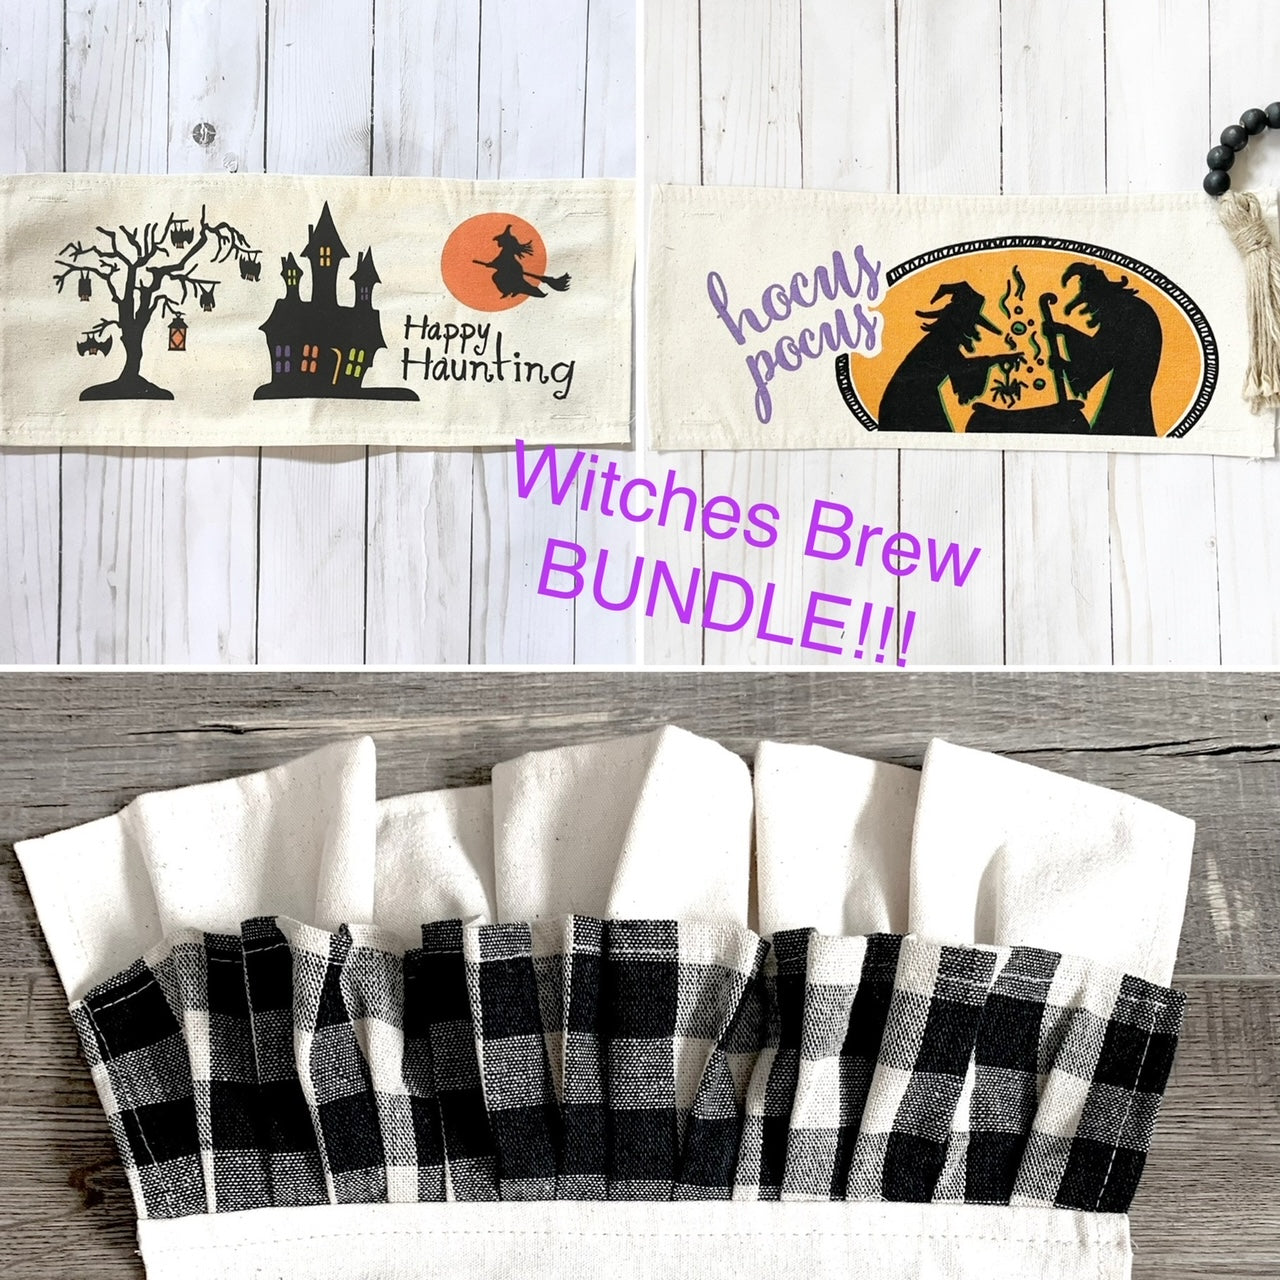 PARTY PACKAGE BUNDLE: Holiday Panel Halloween October Fall Autumn: Hocus Pocus HAPPY HAUNTING / WITCHES BREW + buffalo check runner